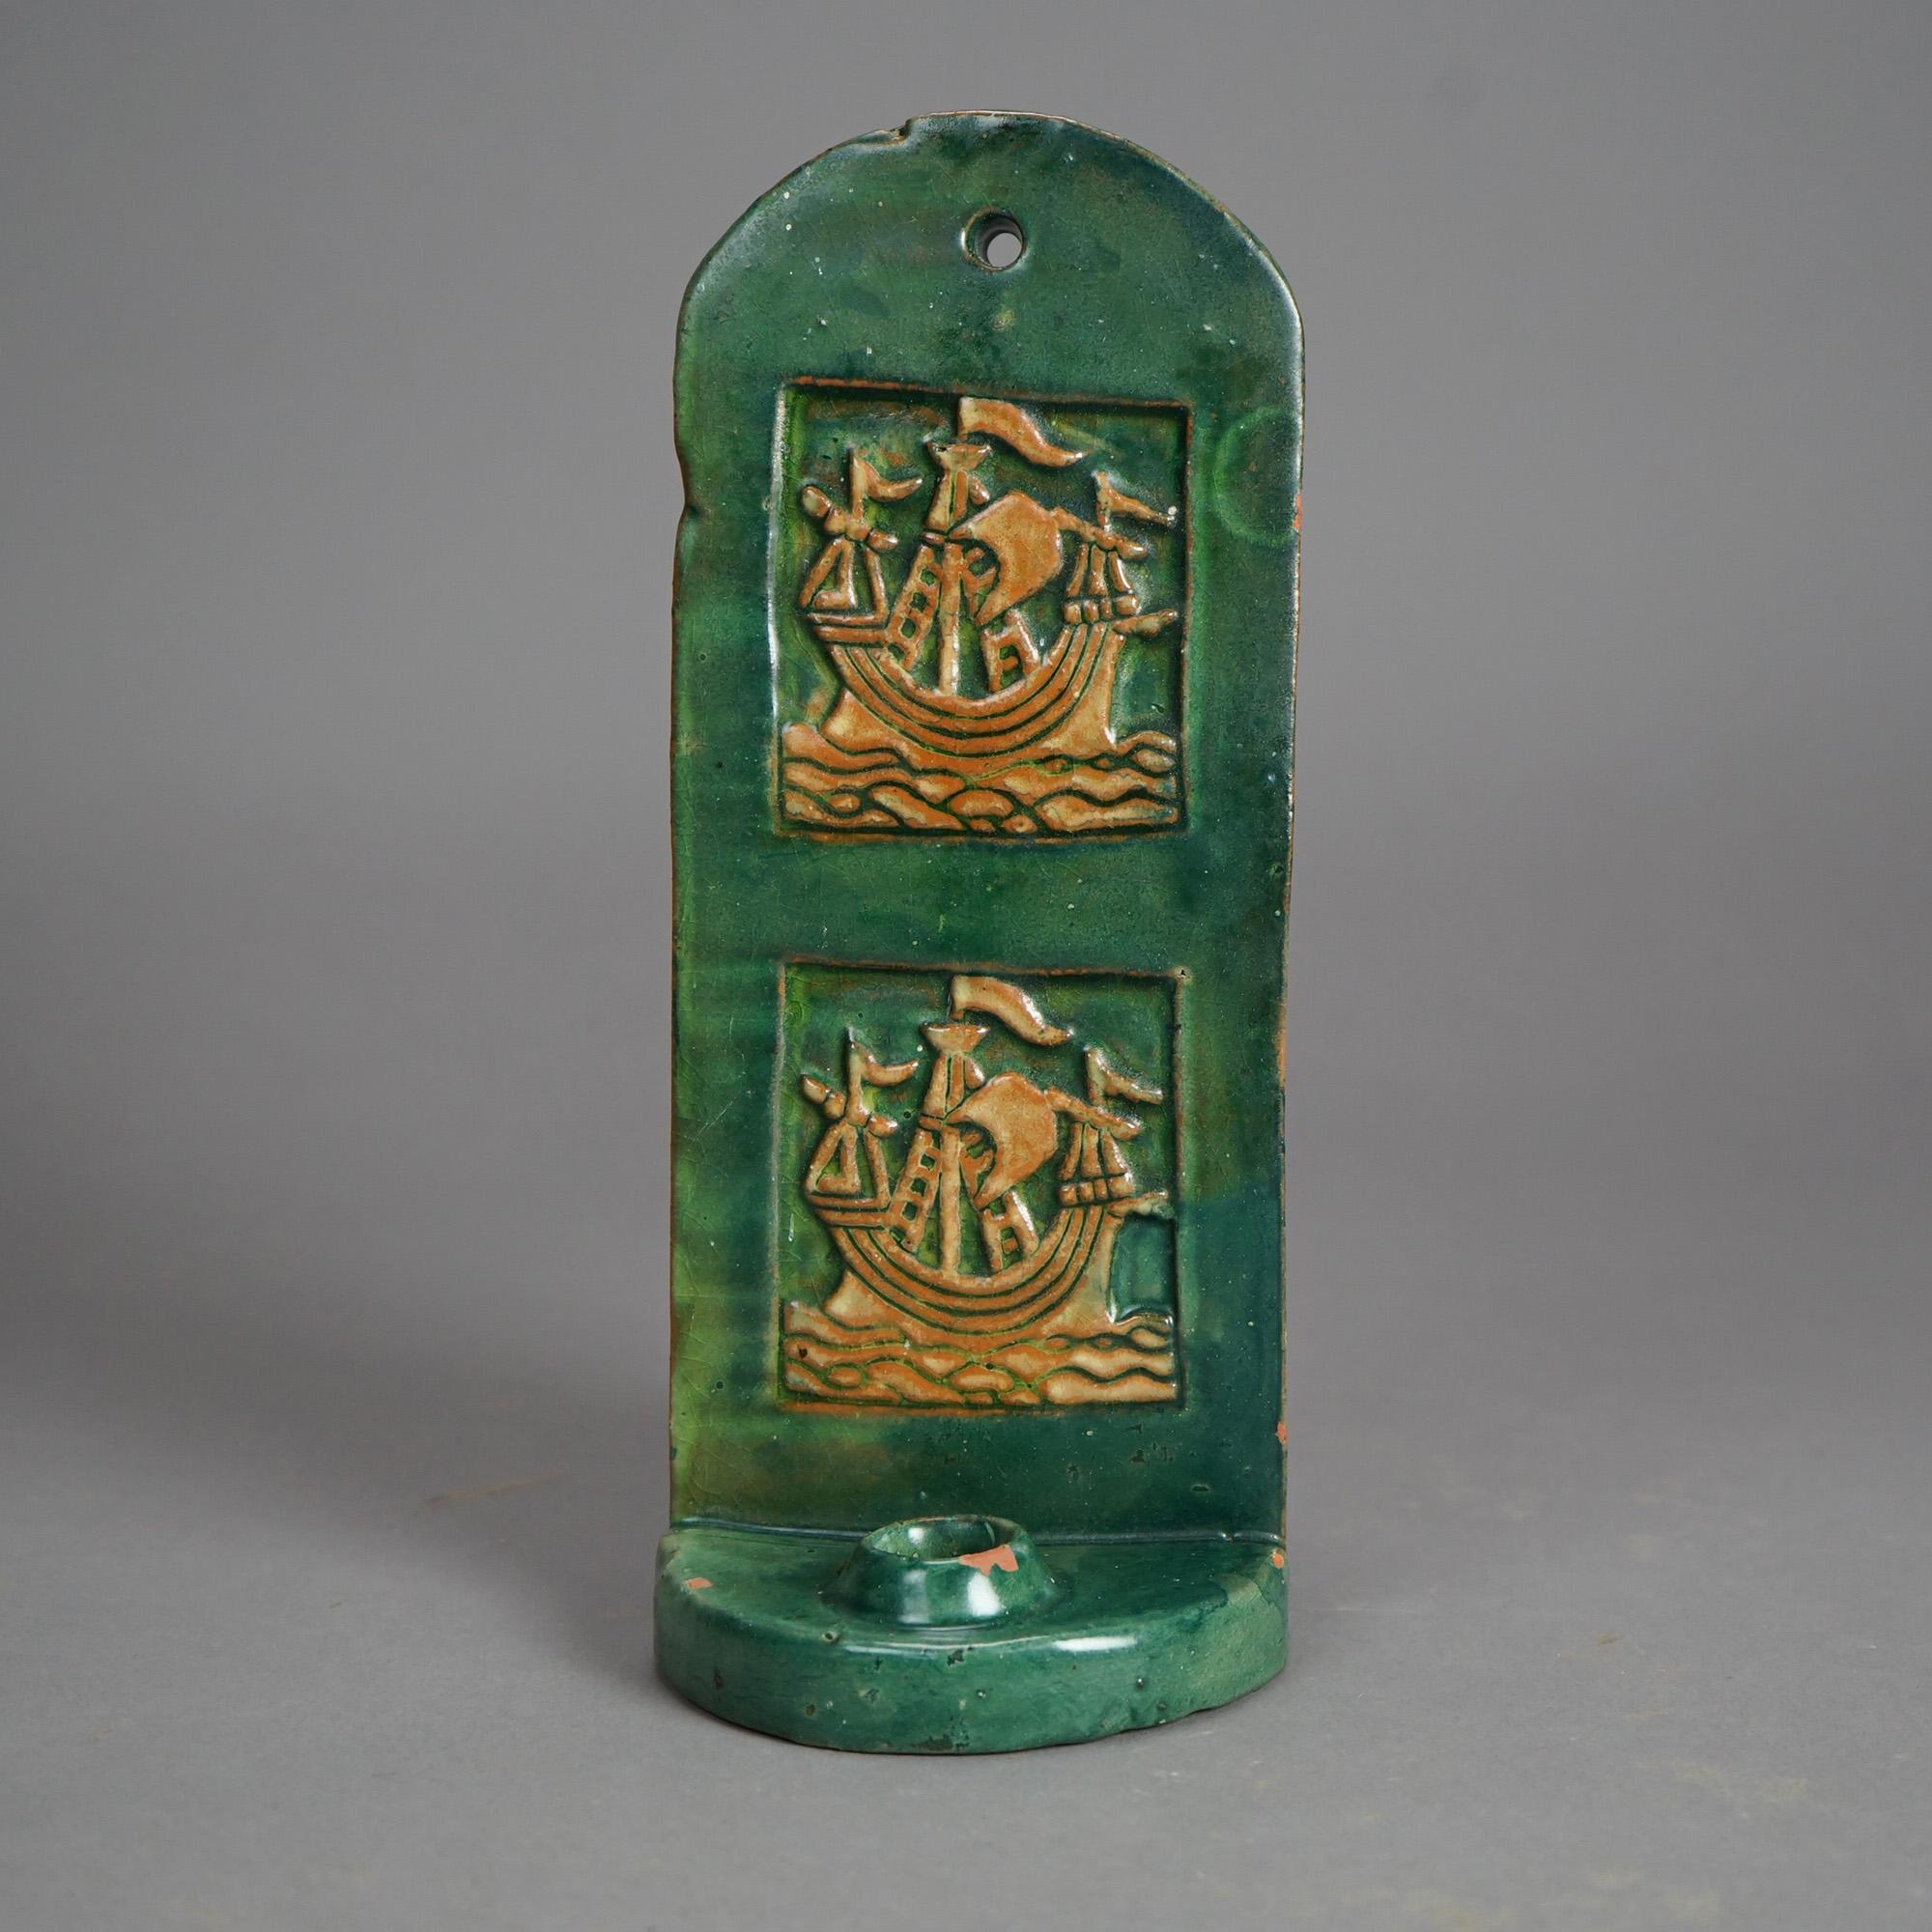 Antique Monmouth Pottery Slab Terra Cotta Candle Wall Sconce with Tall Mast Ships, Embossed Galleon Design, Bucks County Stamp C1910

Measures - 10.5